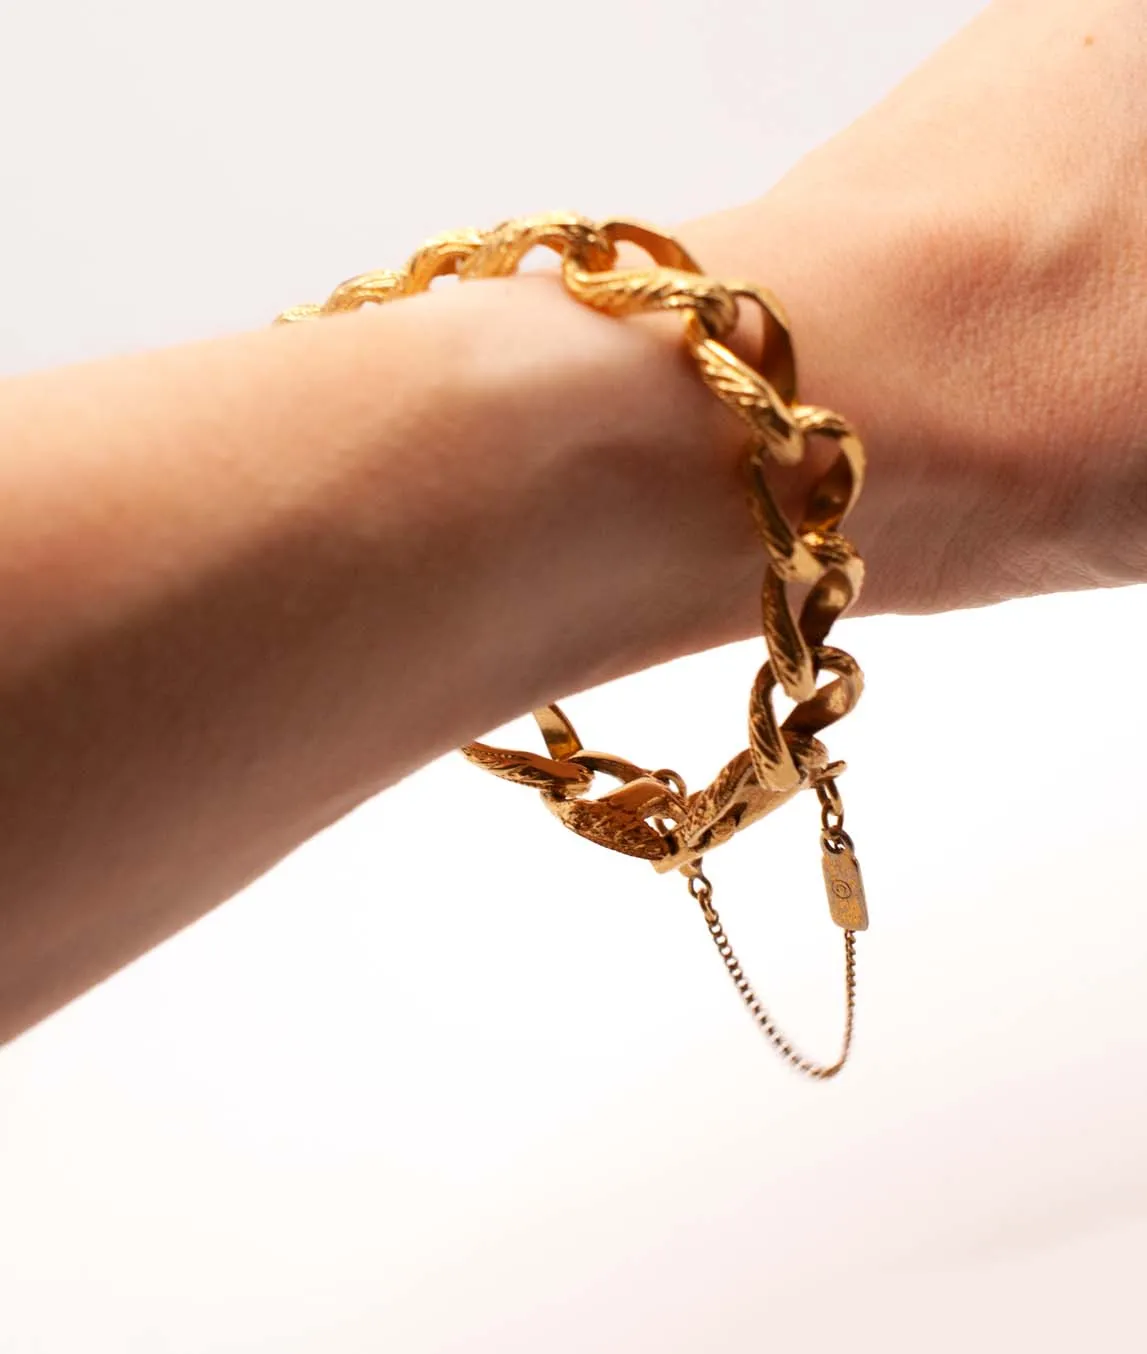 Gold coloured link bracelet with safety chain worn on wrist